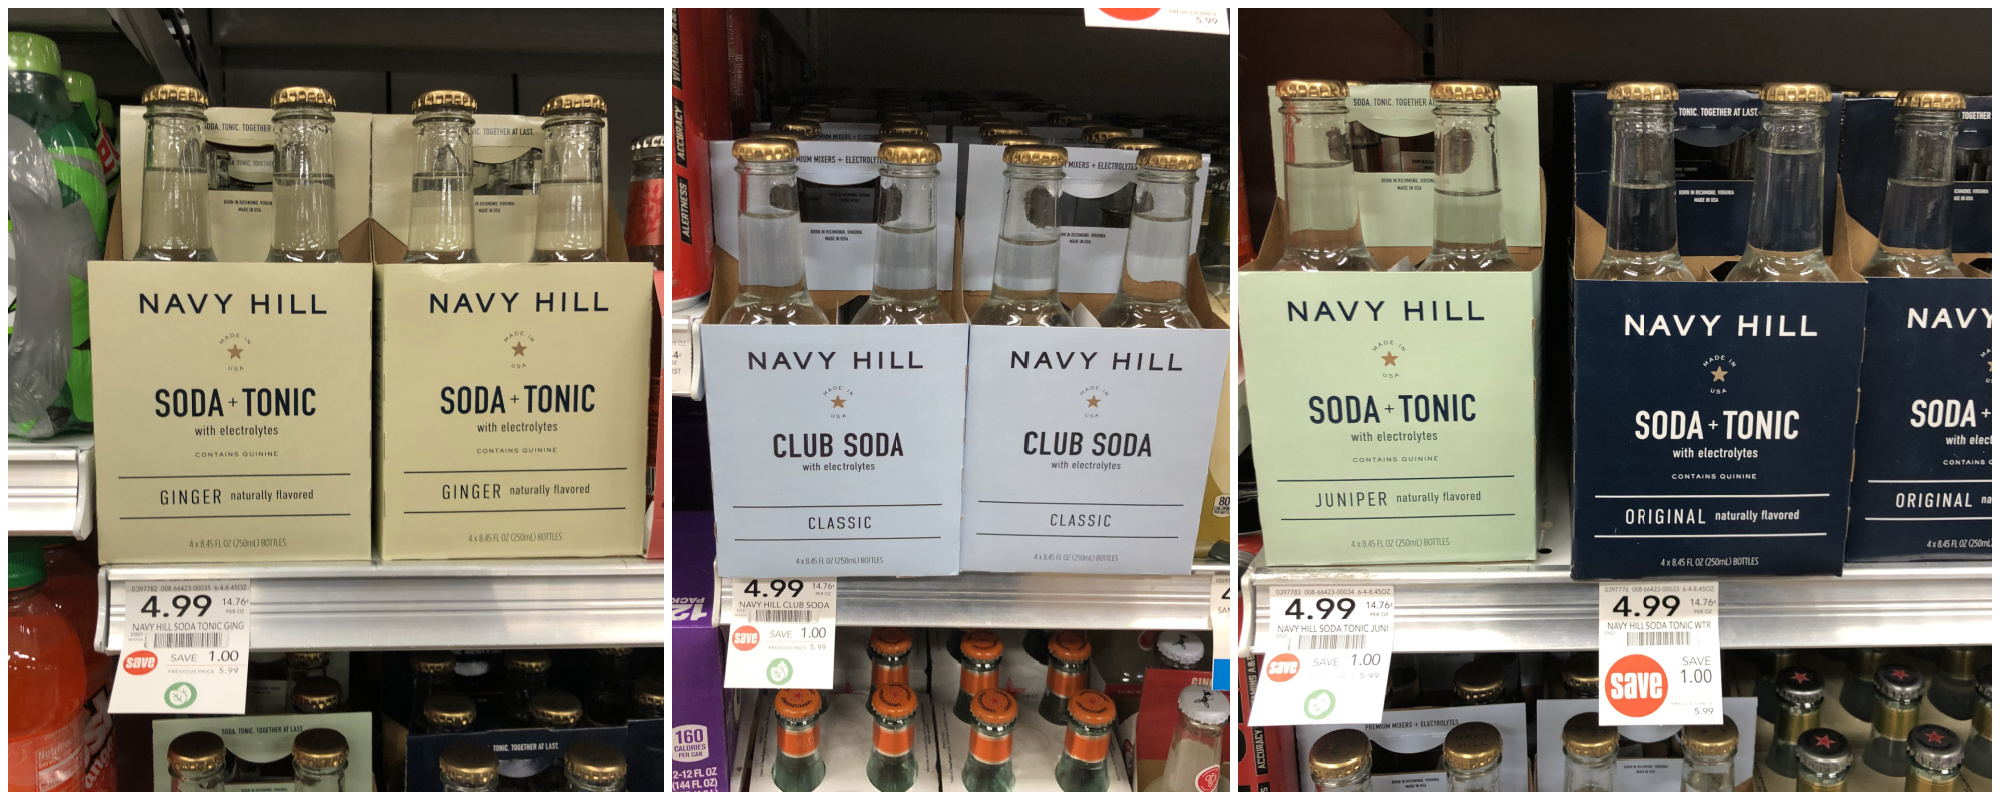 Huge Discount On Navy Hill Mixers At Publix – Save On A Delicious Soda + Tonic Blend! on I Heart Publix 2